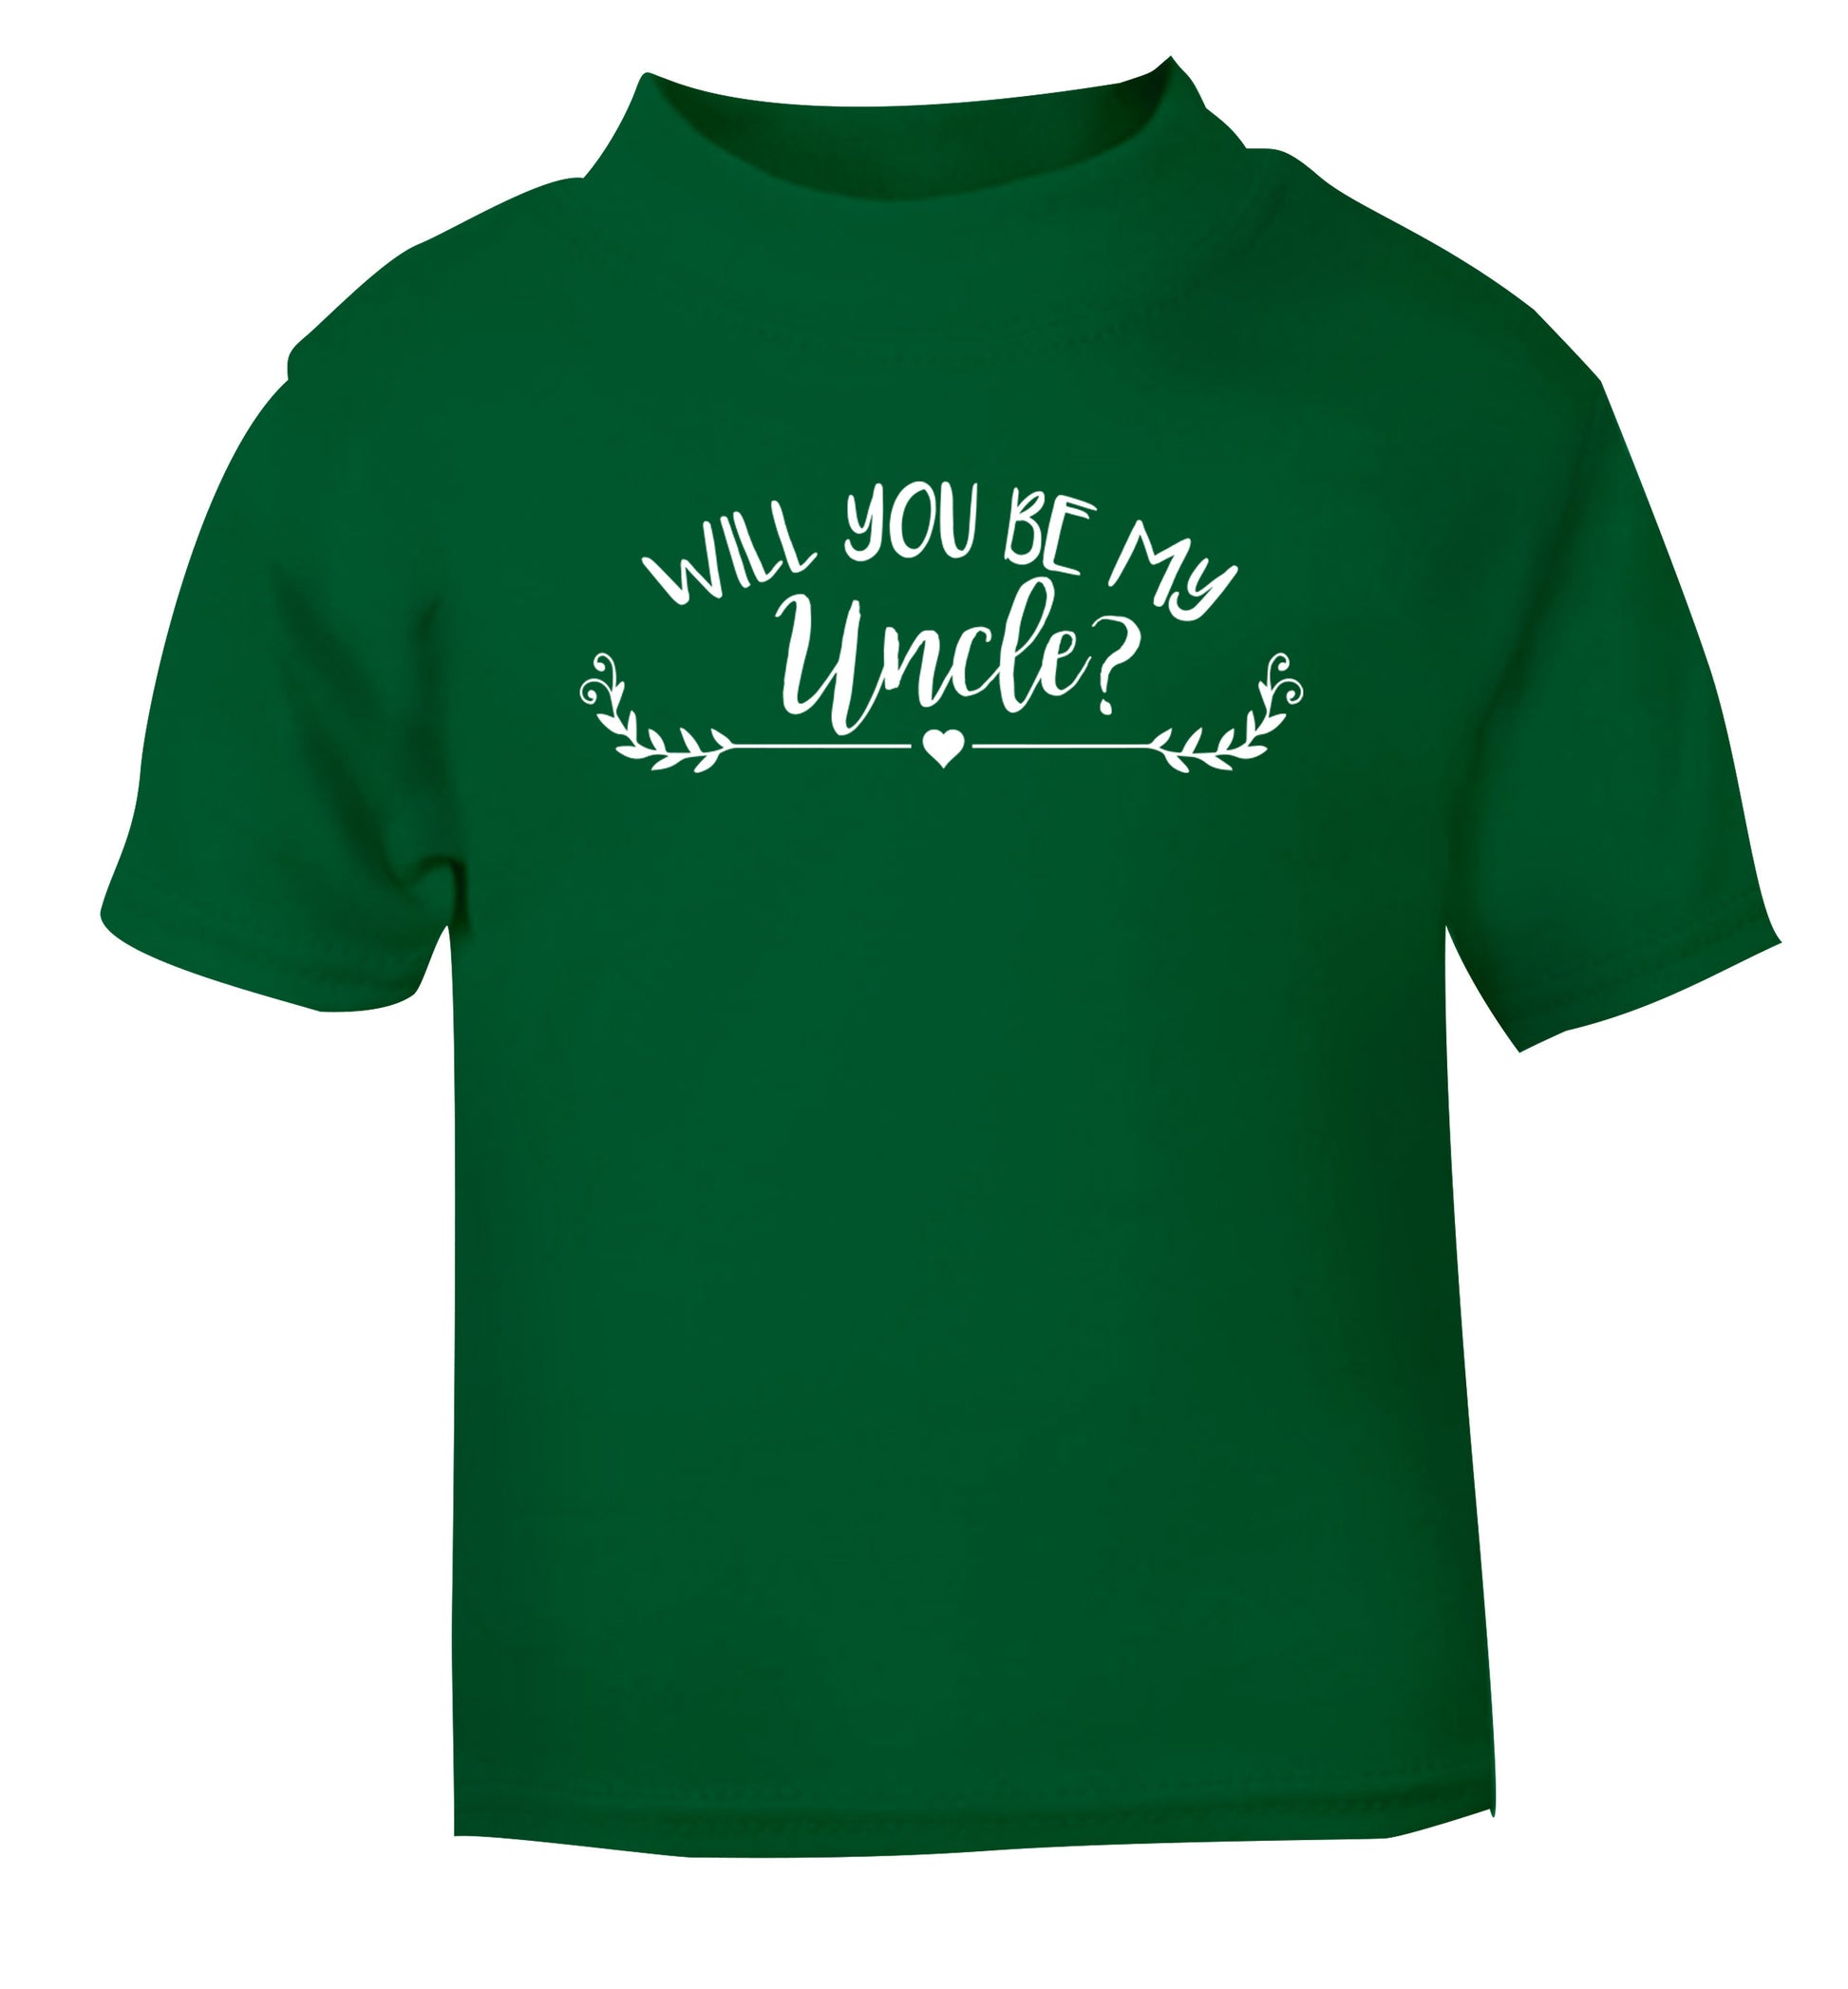 Will you be my uncle? green Baby Toddler Tshirt 2 Years